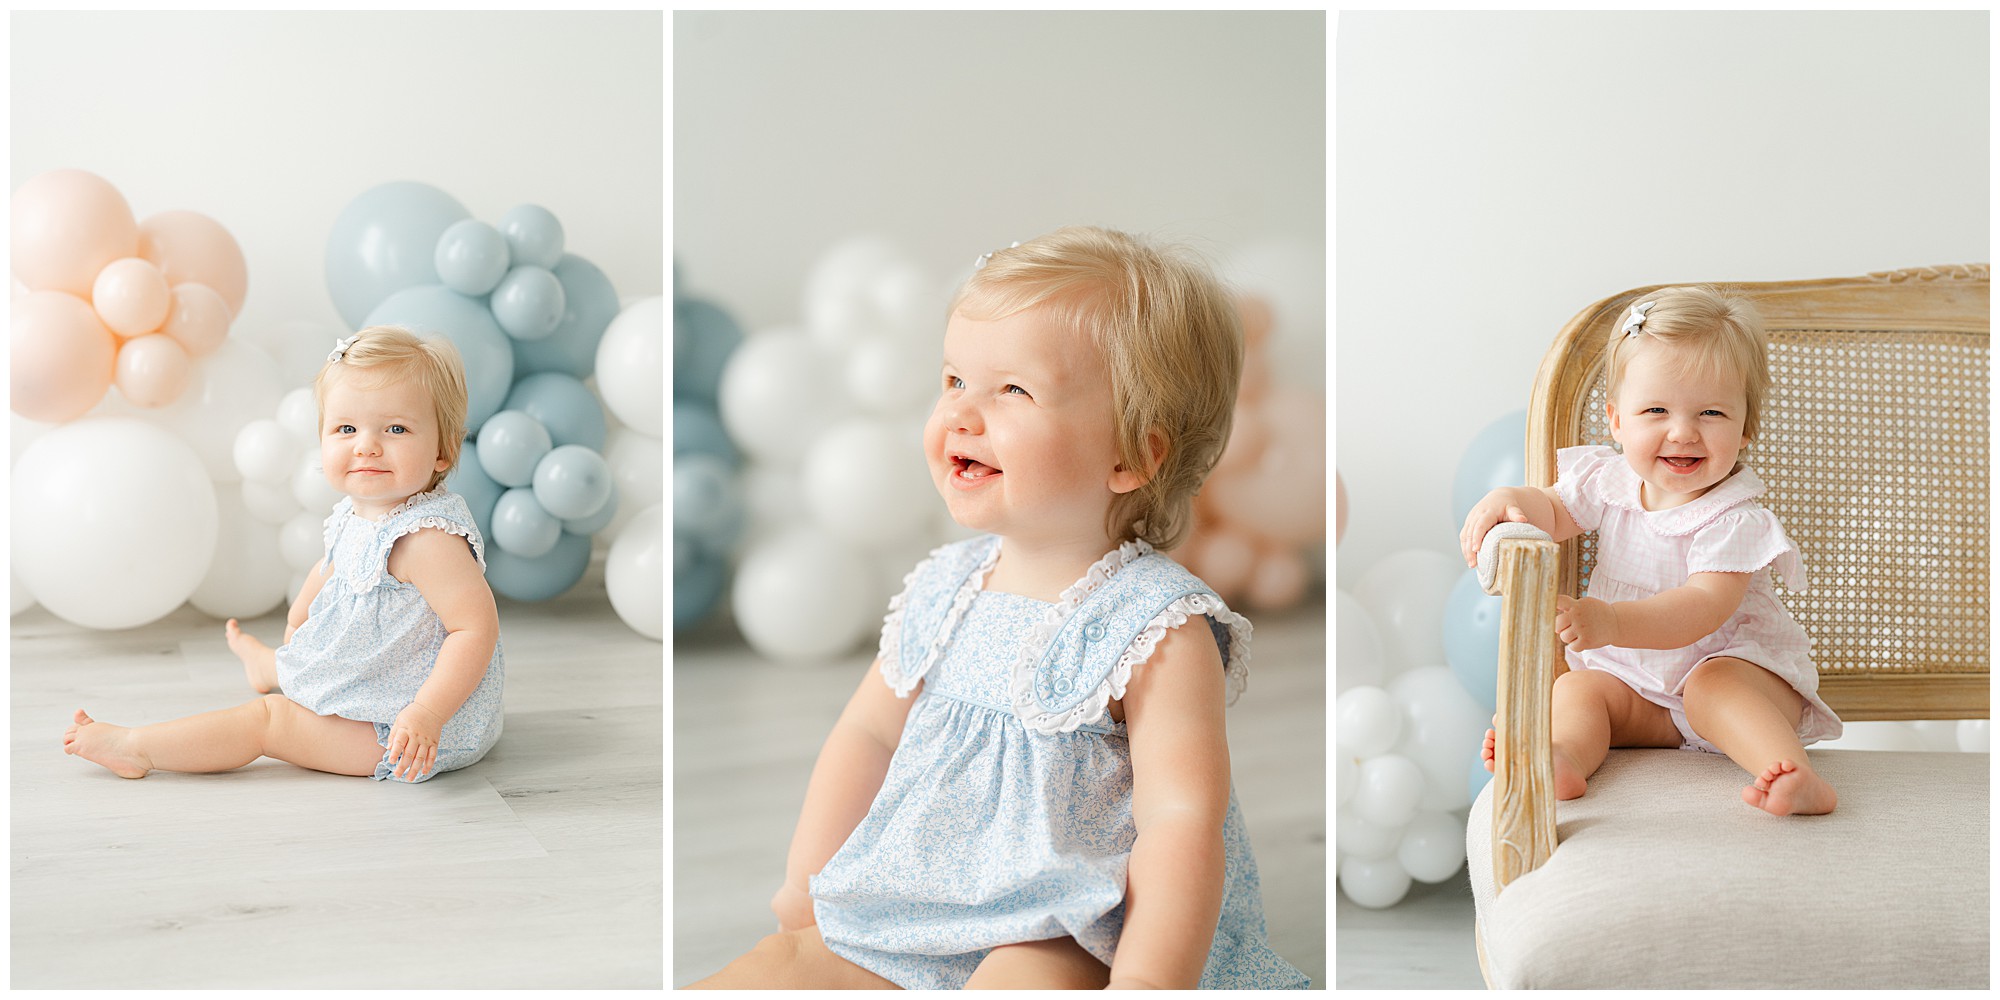 A one year old girl smiling for portraits in front of a blue, white, and pink balloon garland during her Atlanta Cake Smash session for twins.